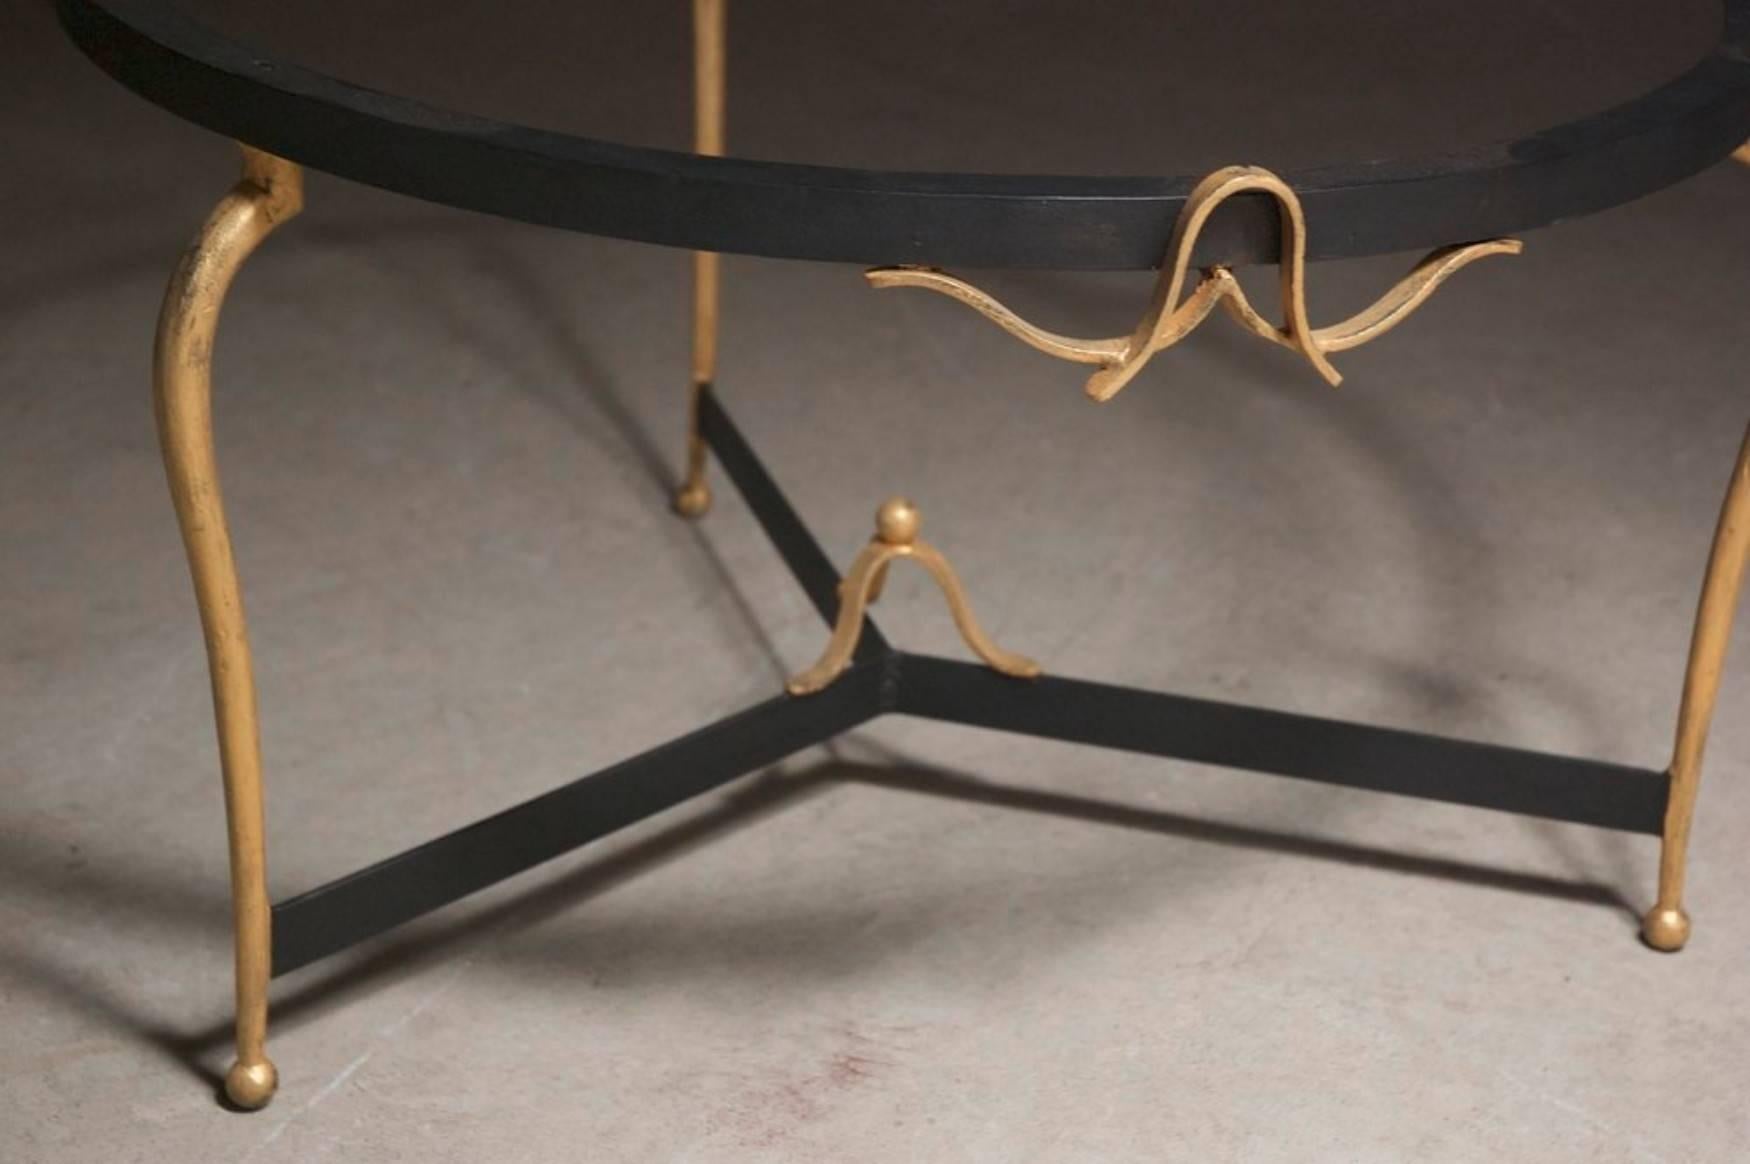 French, 1940s, Art Deco coffee table by René Prou in forged iron with gilding.